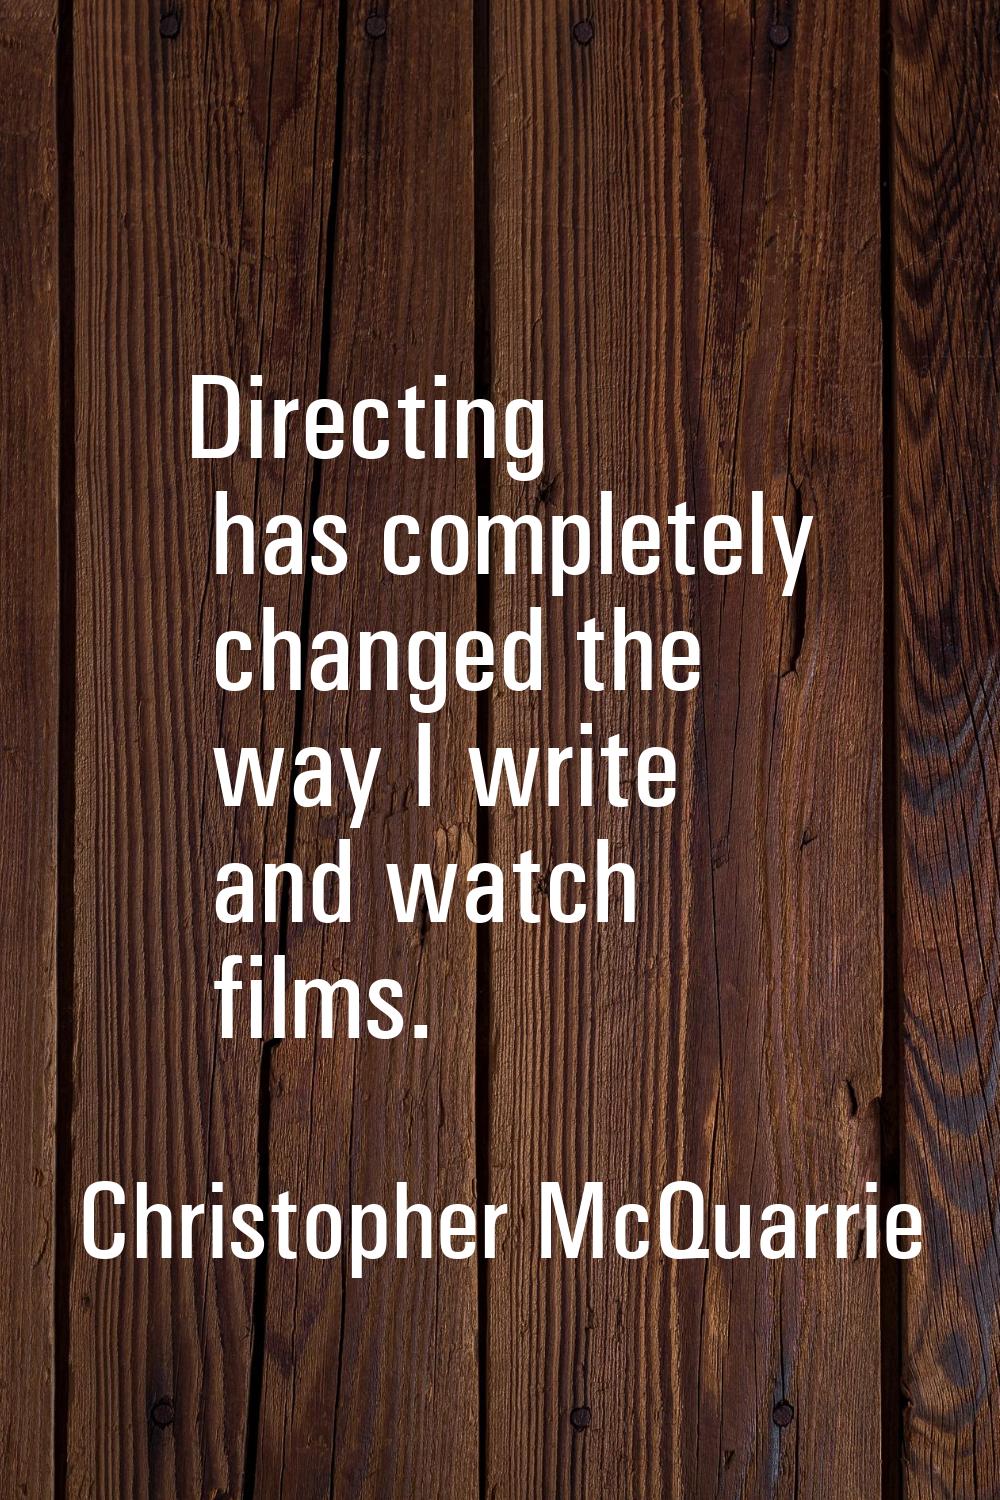 Directing has completely changed the way I write and watch films.